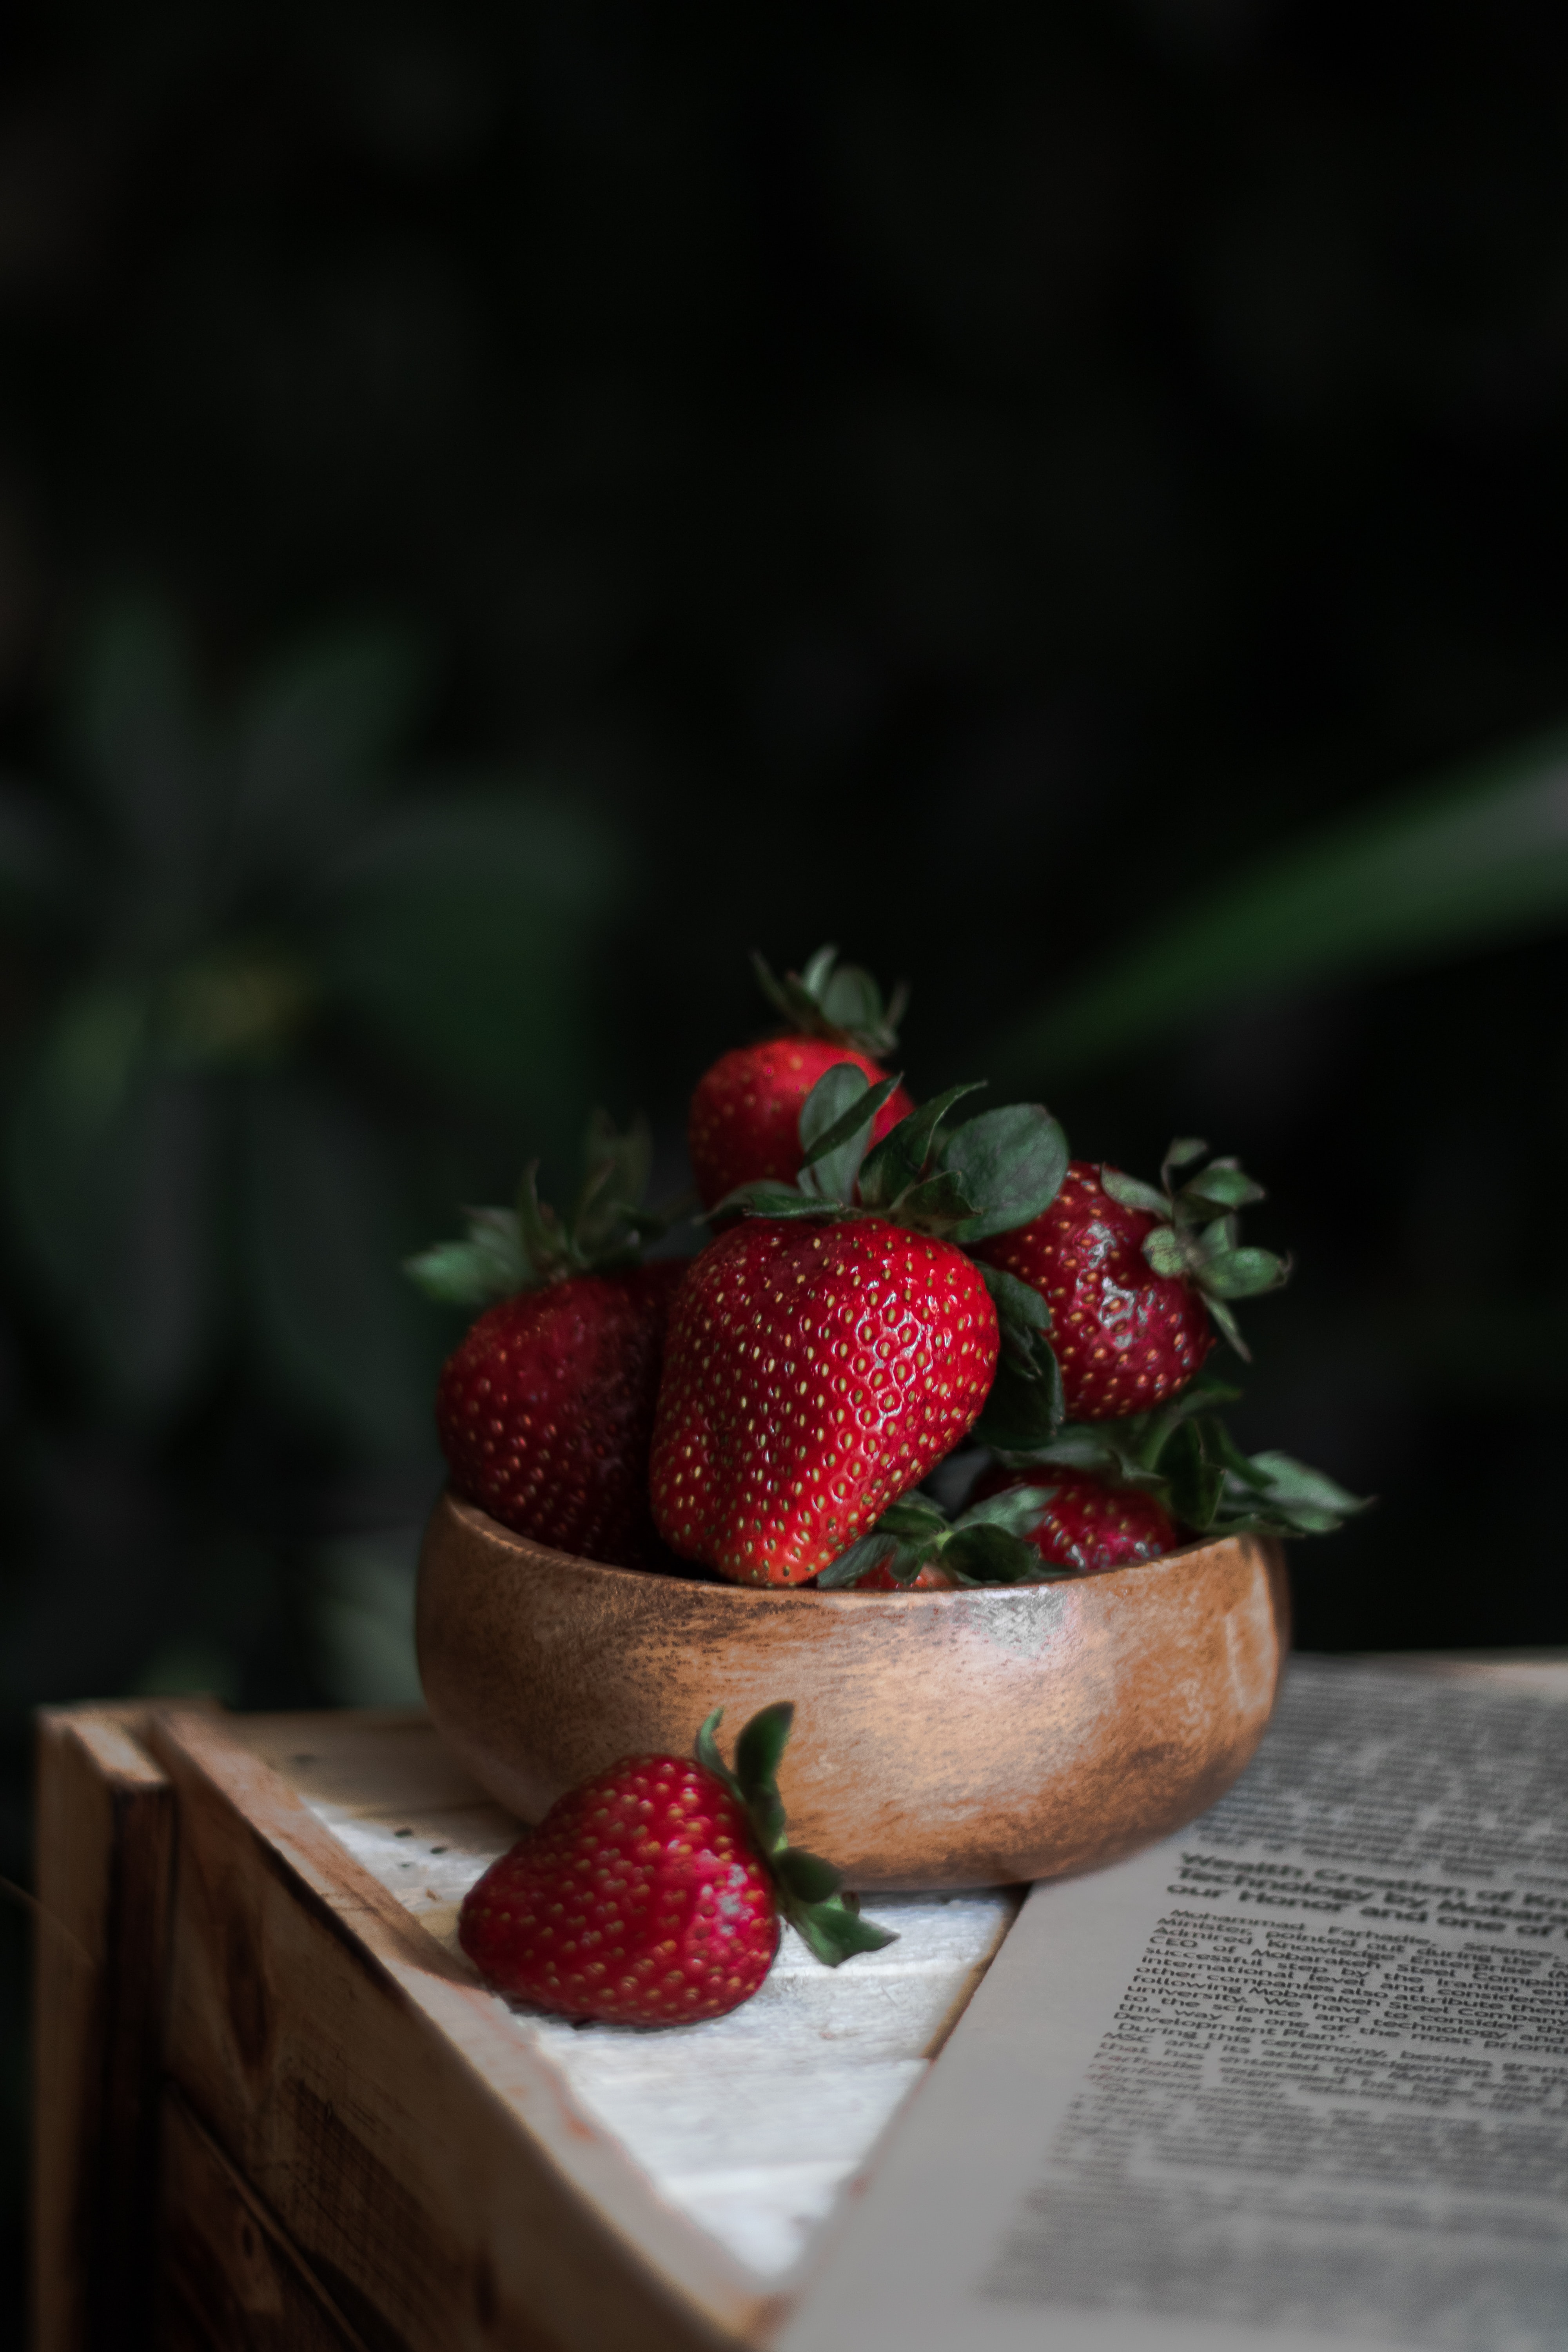 strawberry, food, berry, plate, fruit, newspaper